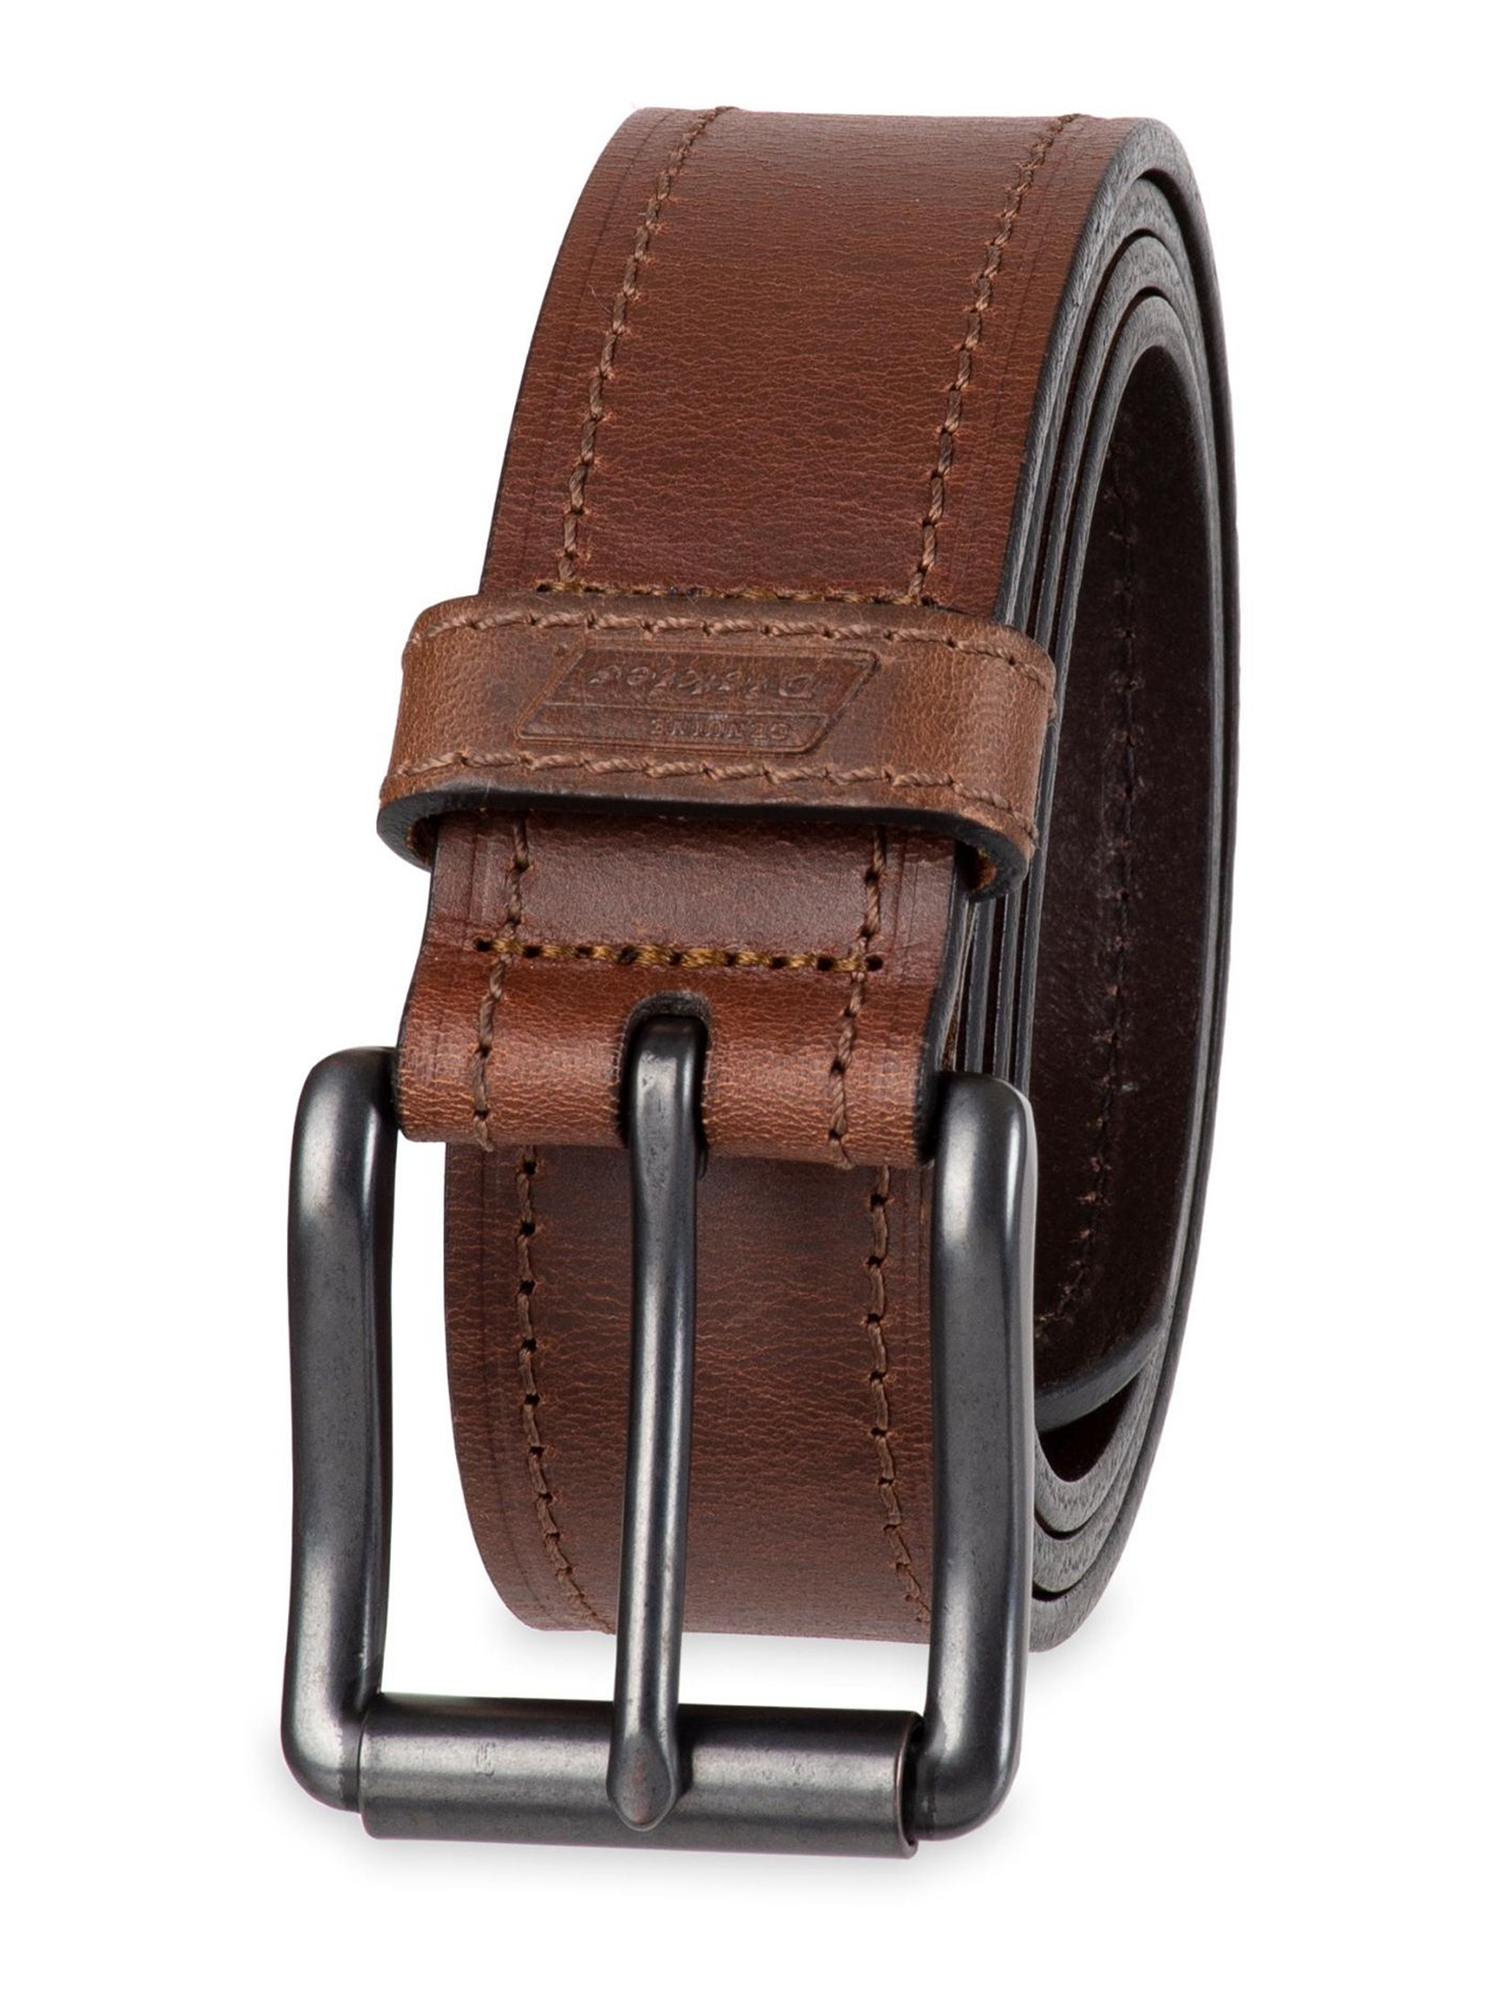 Genuine Dickies Men's Casual Brown Leather Work Belt with Roller Buckle (Regular and Big & Tall Sizes) - image 4 of 5